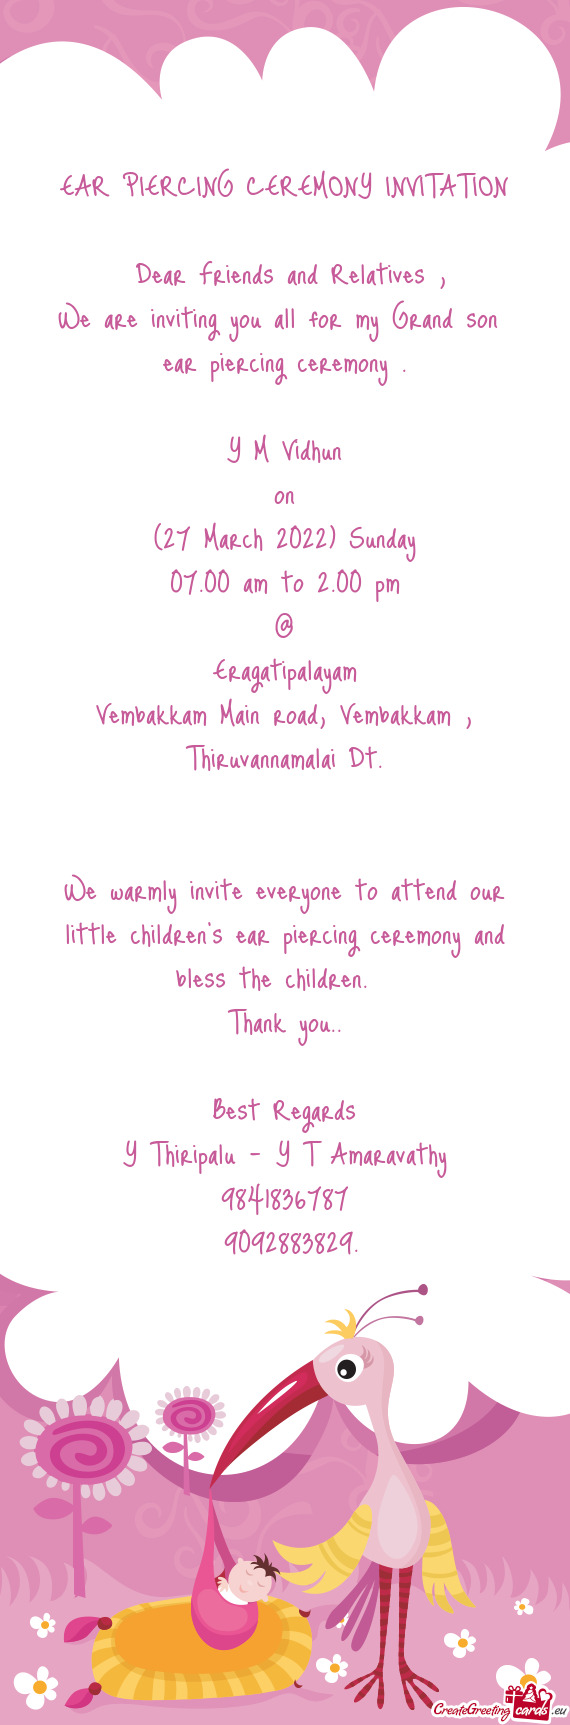 We warmly invite everyone to attend our little children’s ear piercing ceremony and bless t